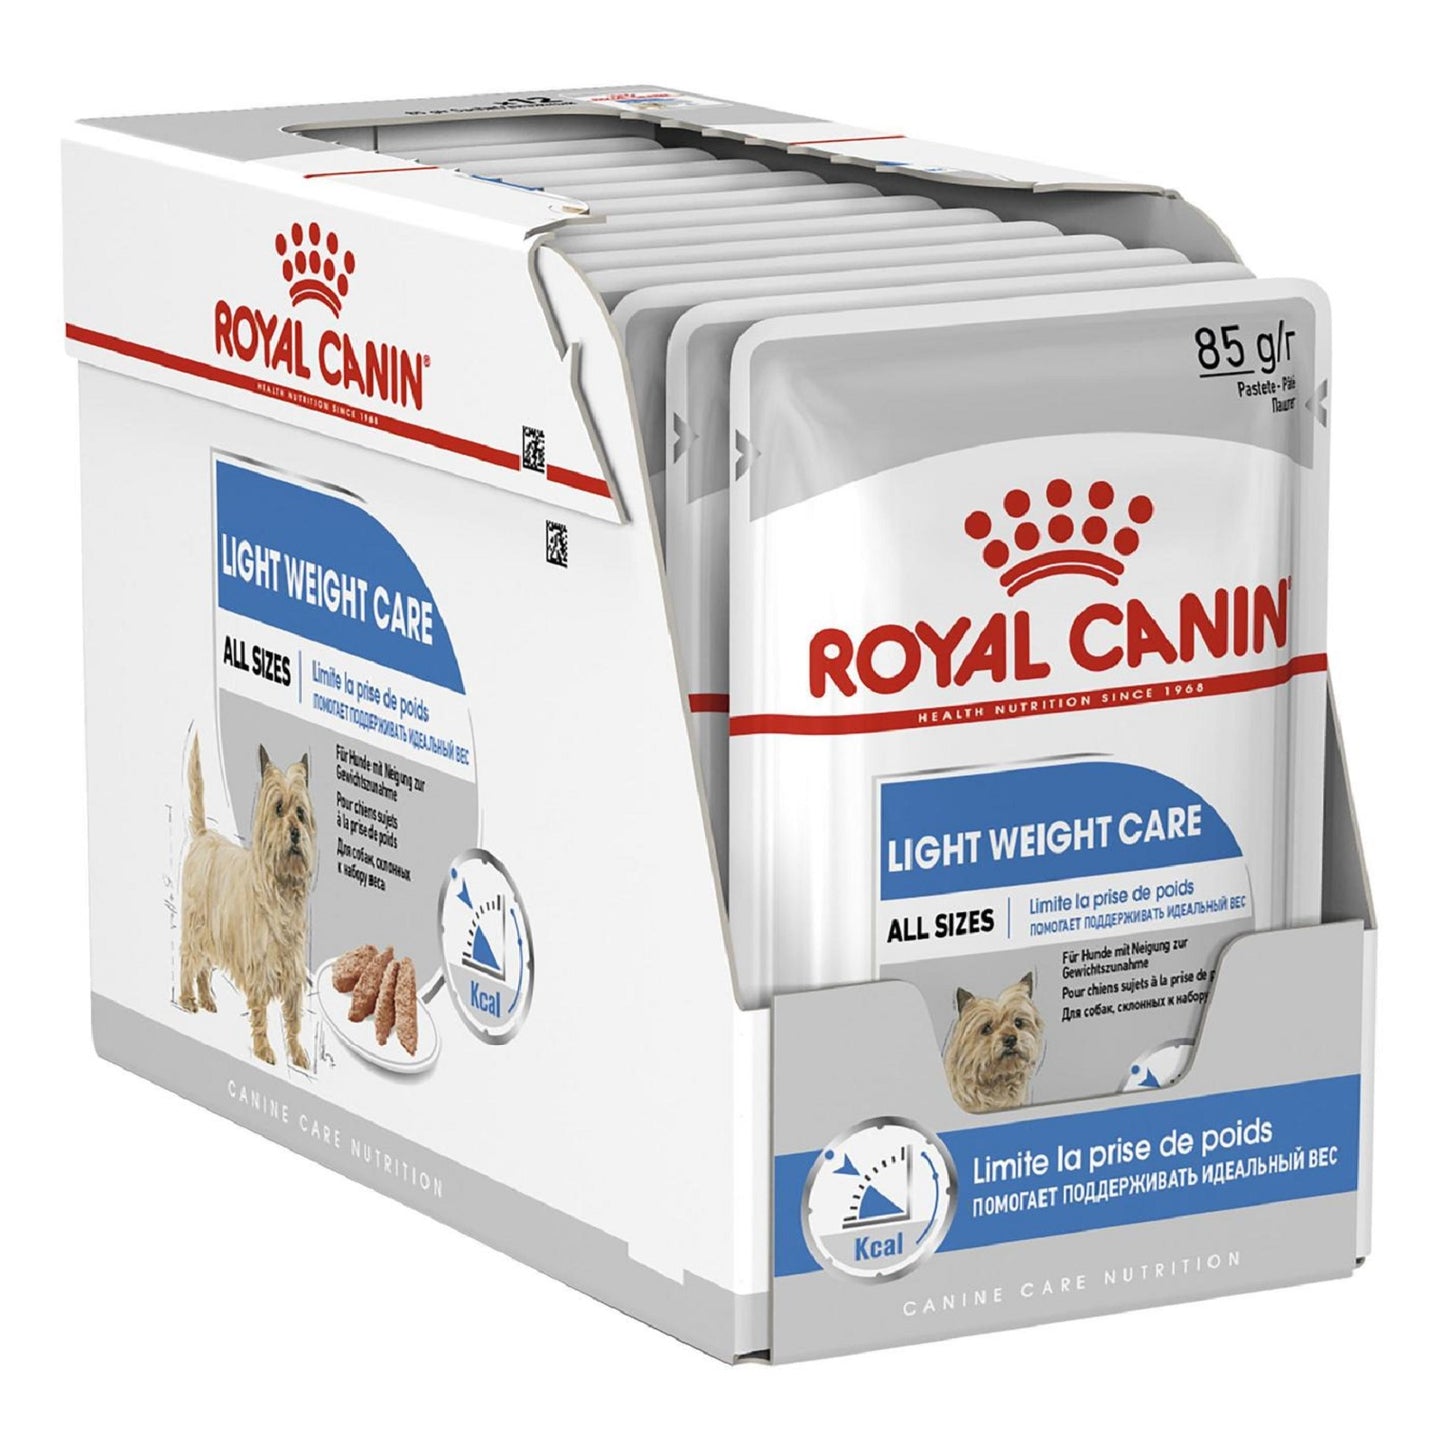 ROYAL CANIN - Light Weight Care Pouches (12 x 85g)